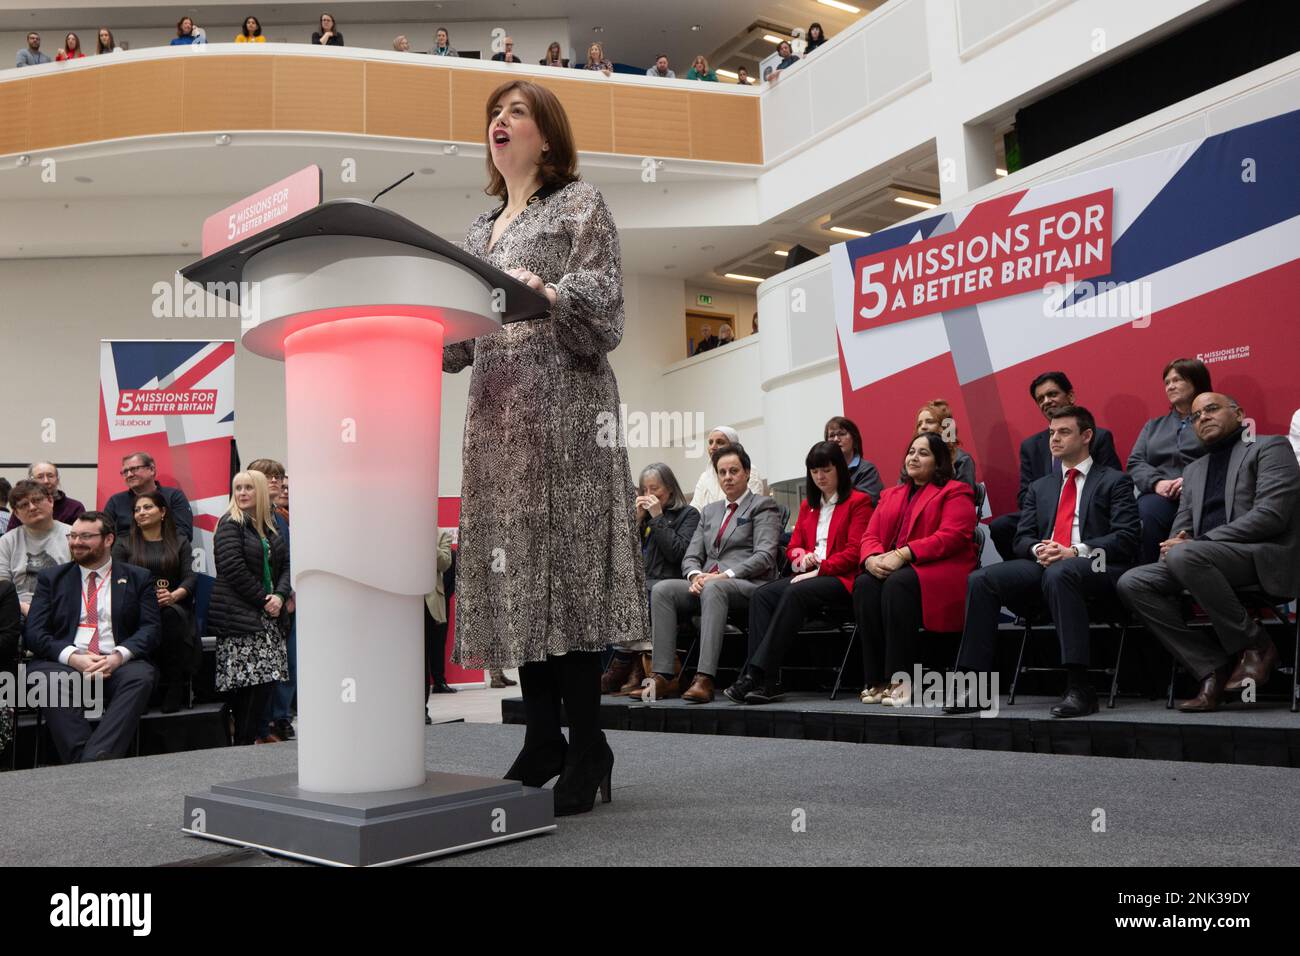 Lucy Powell Shadow Secretary of State for Digital, Culture, Media and Sport speaks before Keir Starmer launches five bold missions for a better Britain at 1 Angel Square, Manchester UK. The Labour leader spoke in front of shadow cabinet colleagues and manchester based politicians. He outlined the purpose of missions as. “It means providing a clear set of priorities.  A relentless focus on the things that matter most.” Picture: garyroberts/worldwidefeatures.com Stock Photo